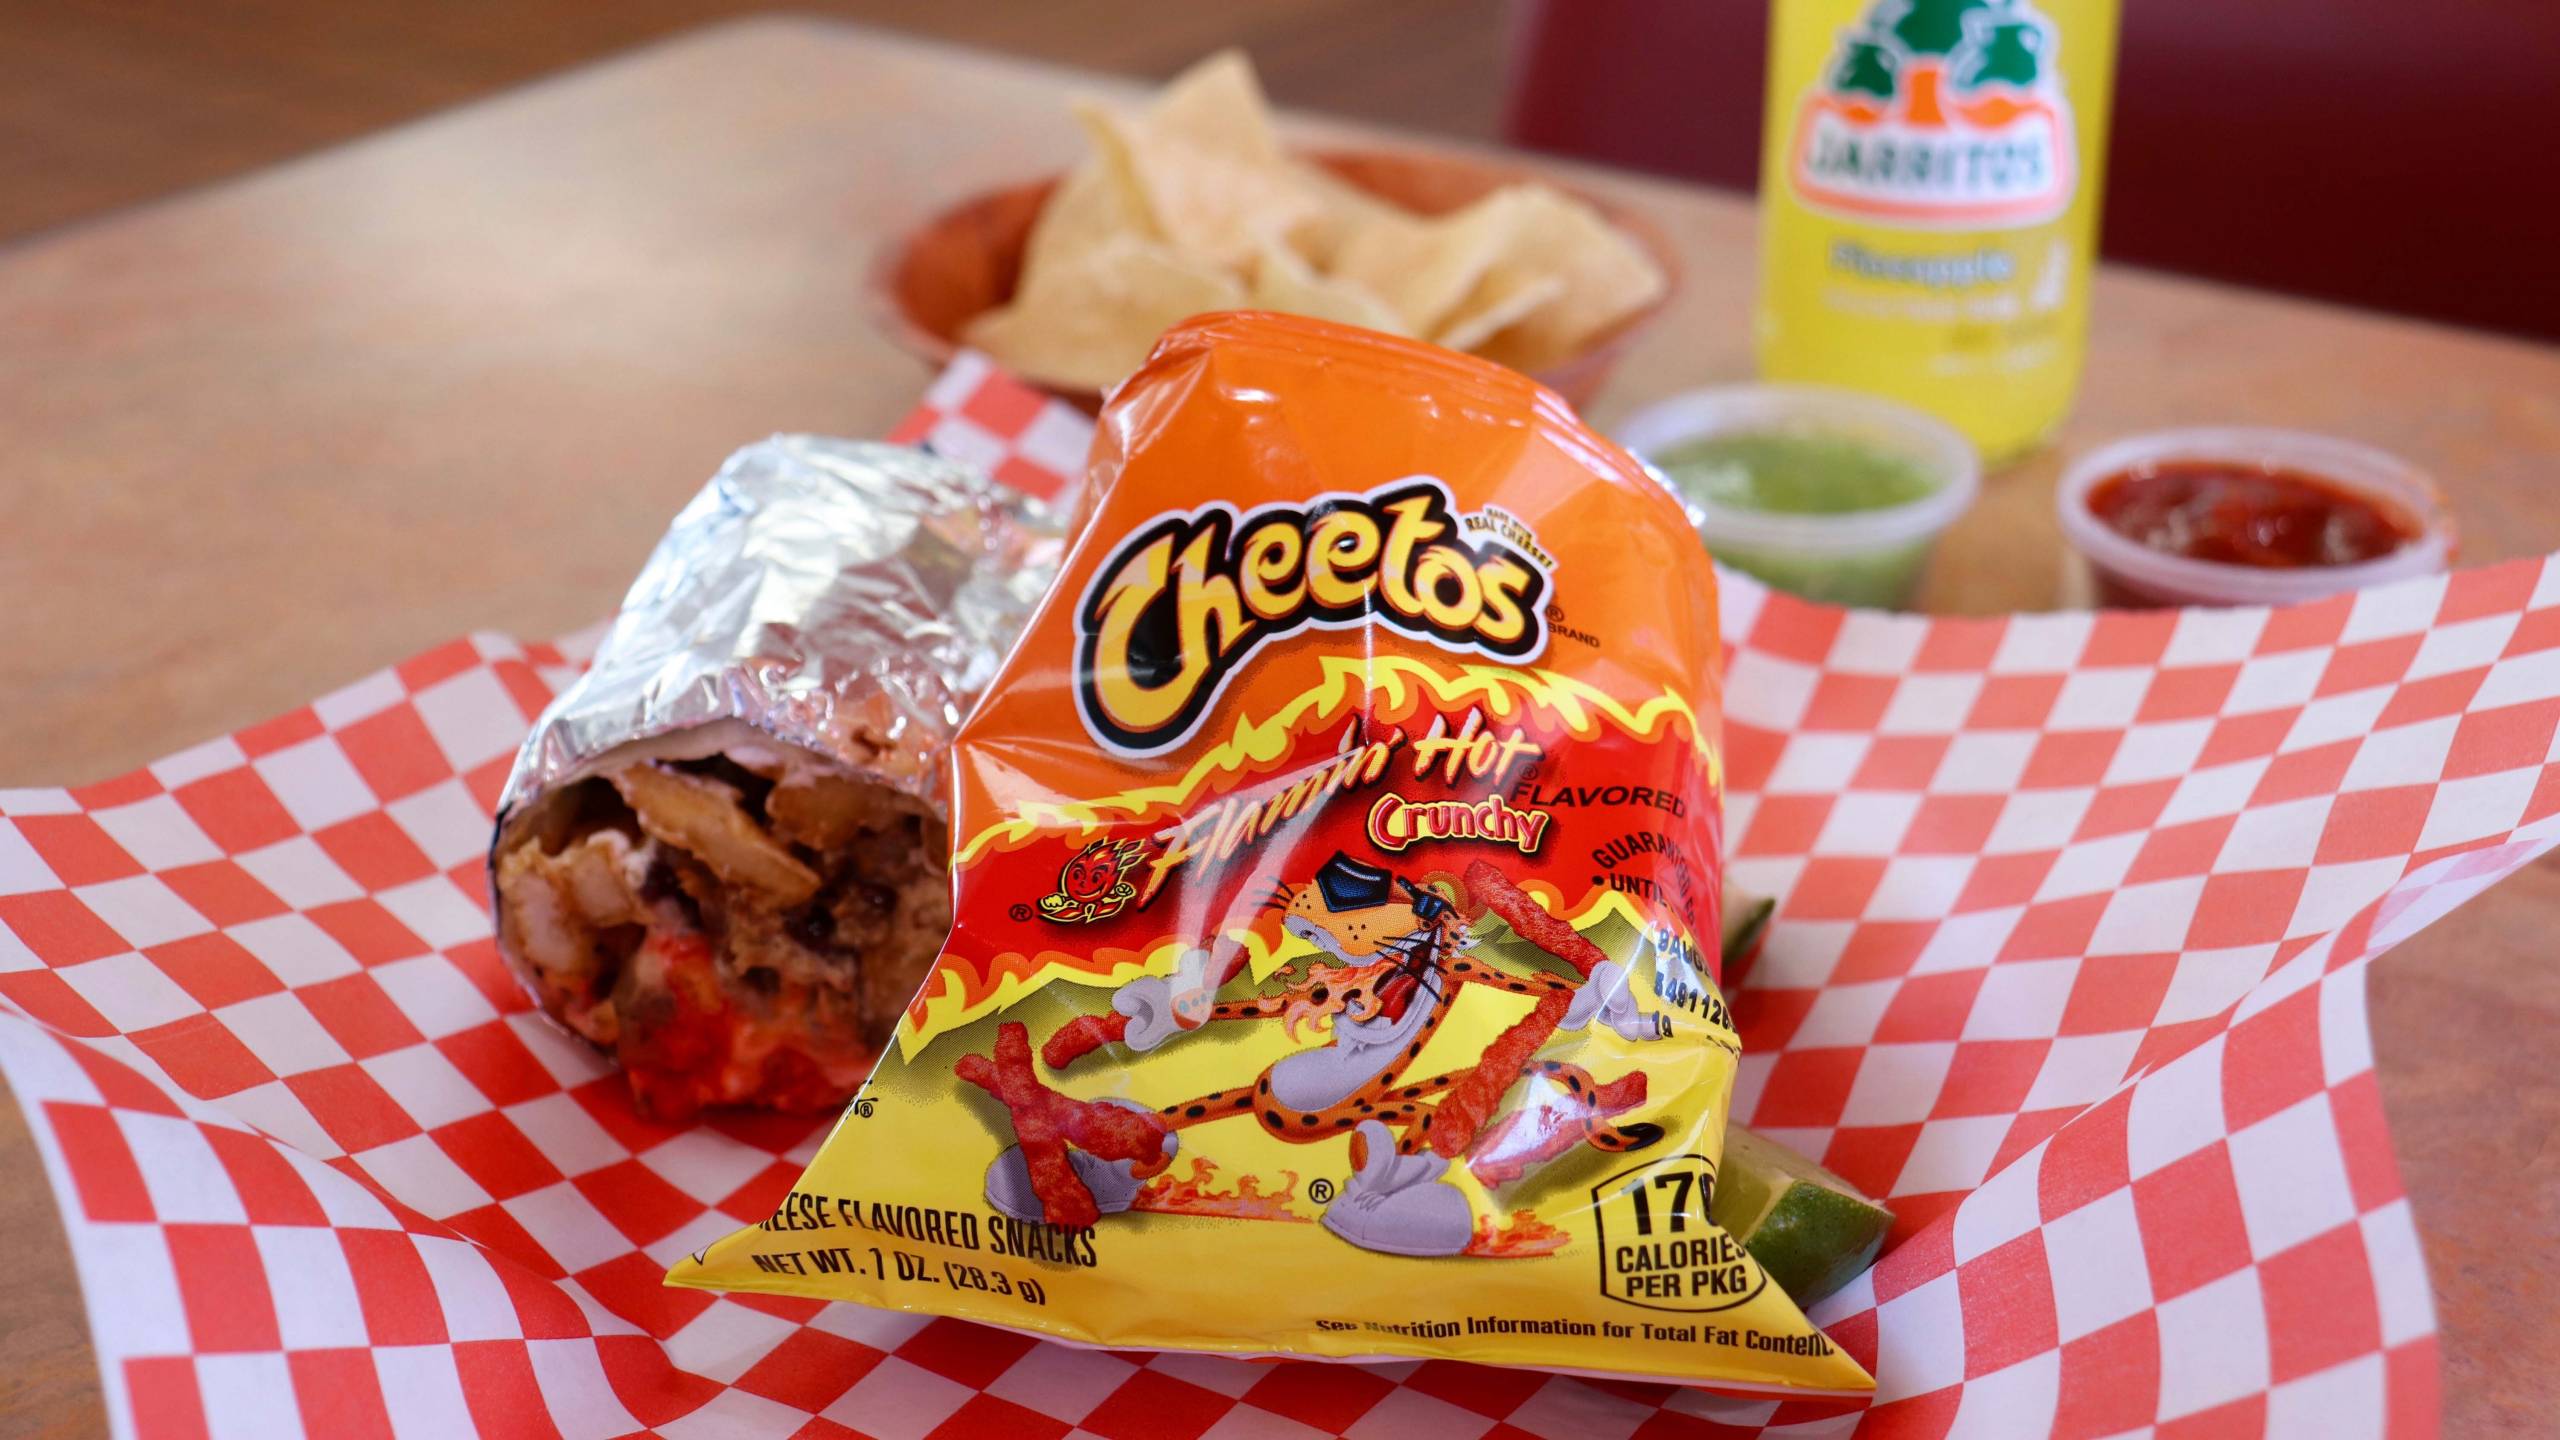 A foil-wrapped burrito and a bag of Flamin' Hot Cheetos on red and white checkered butcher paper.